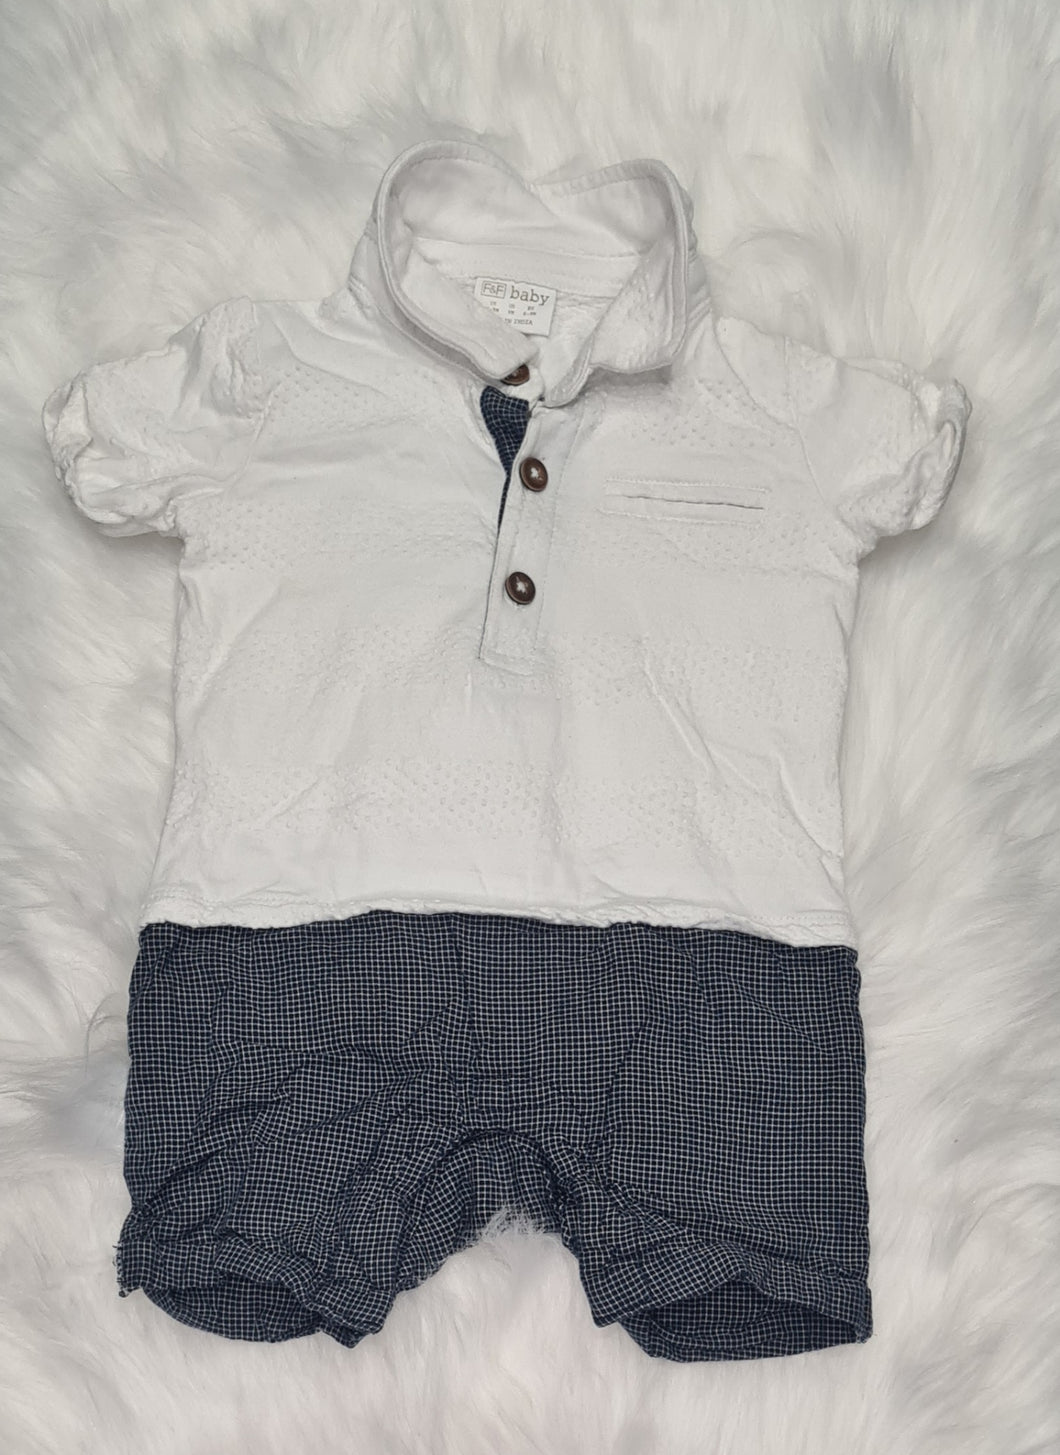 Boys 6-9 Months - Next - Navy and White Polo Romper